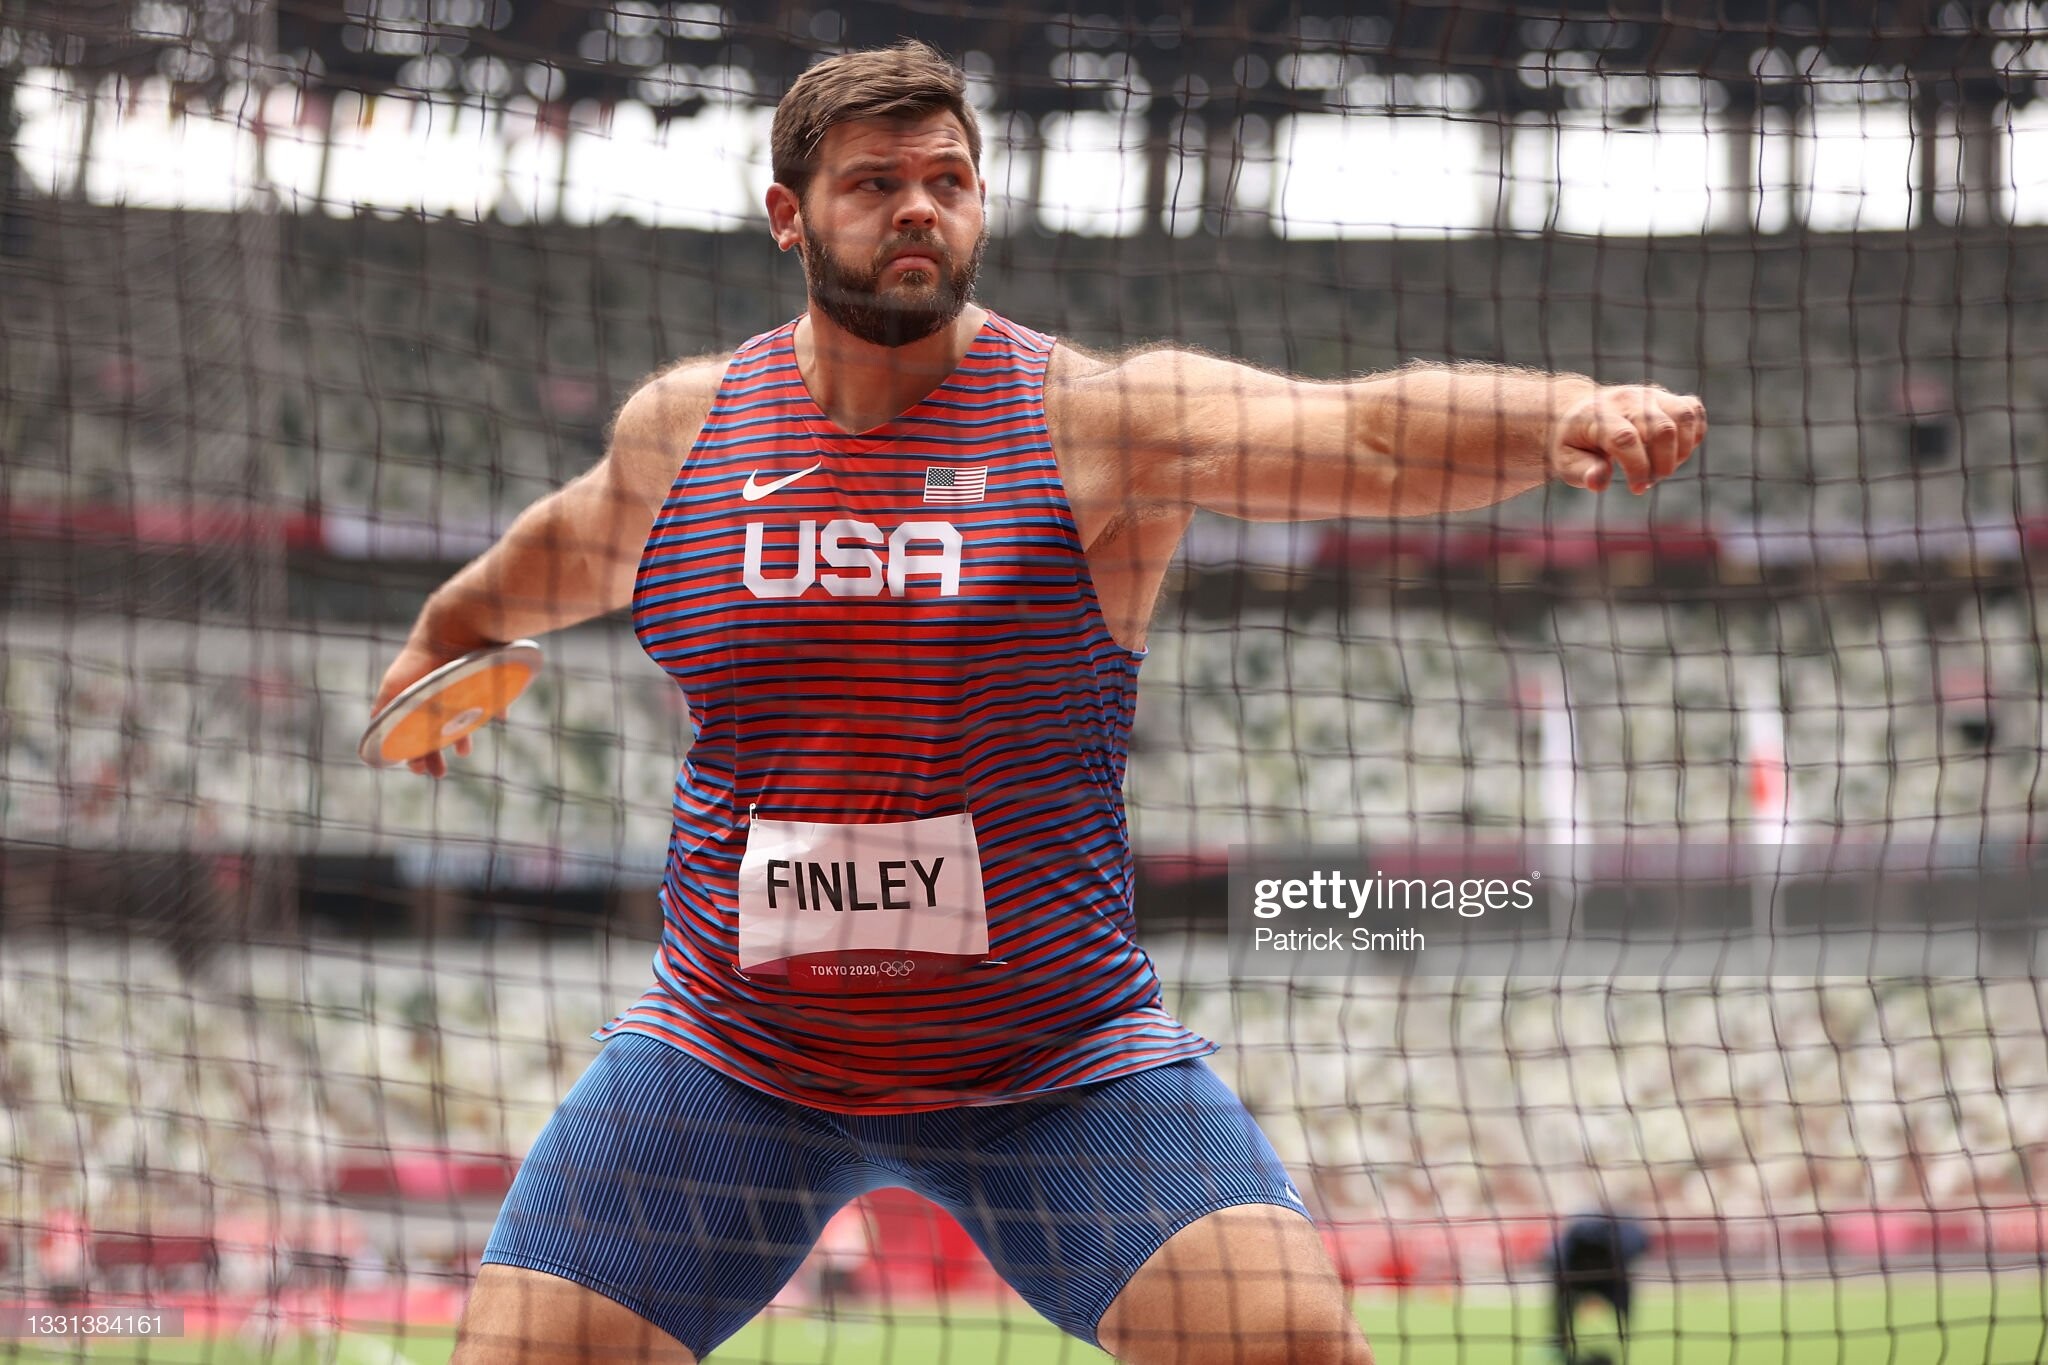 Mason Finley, Discus throwing excellence, Rising star, Track and field, 2050x1370 HD Desktop